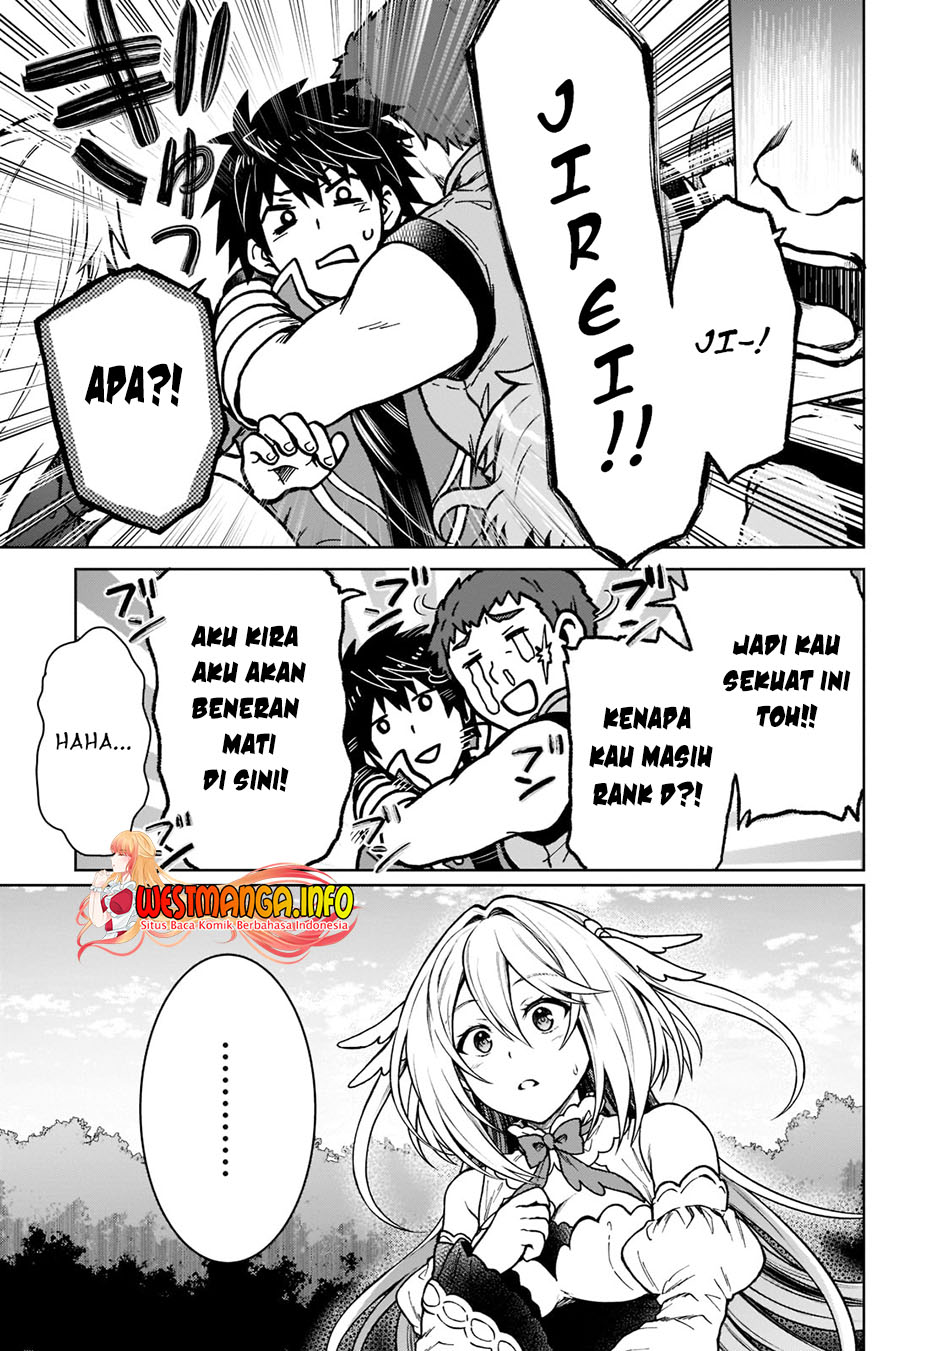 Dilarang COPAS - situs resmi www.mangacanblog.com - Komik d rank adventurer invited by a brave party and the stalking princess 011 - chapter 11 12 Indonesia d rank adventurer invited by a brave party and the stalking princess 011 - chapter 11 Terbaru 24|Baca Manga Komik Indonesia|Mangacan